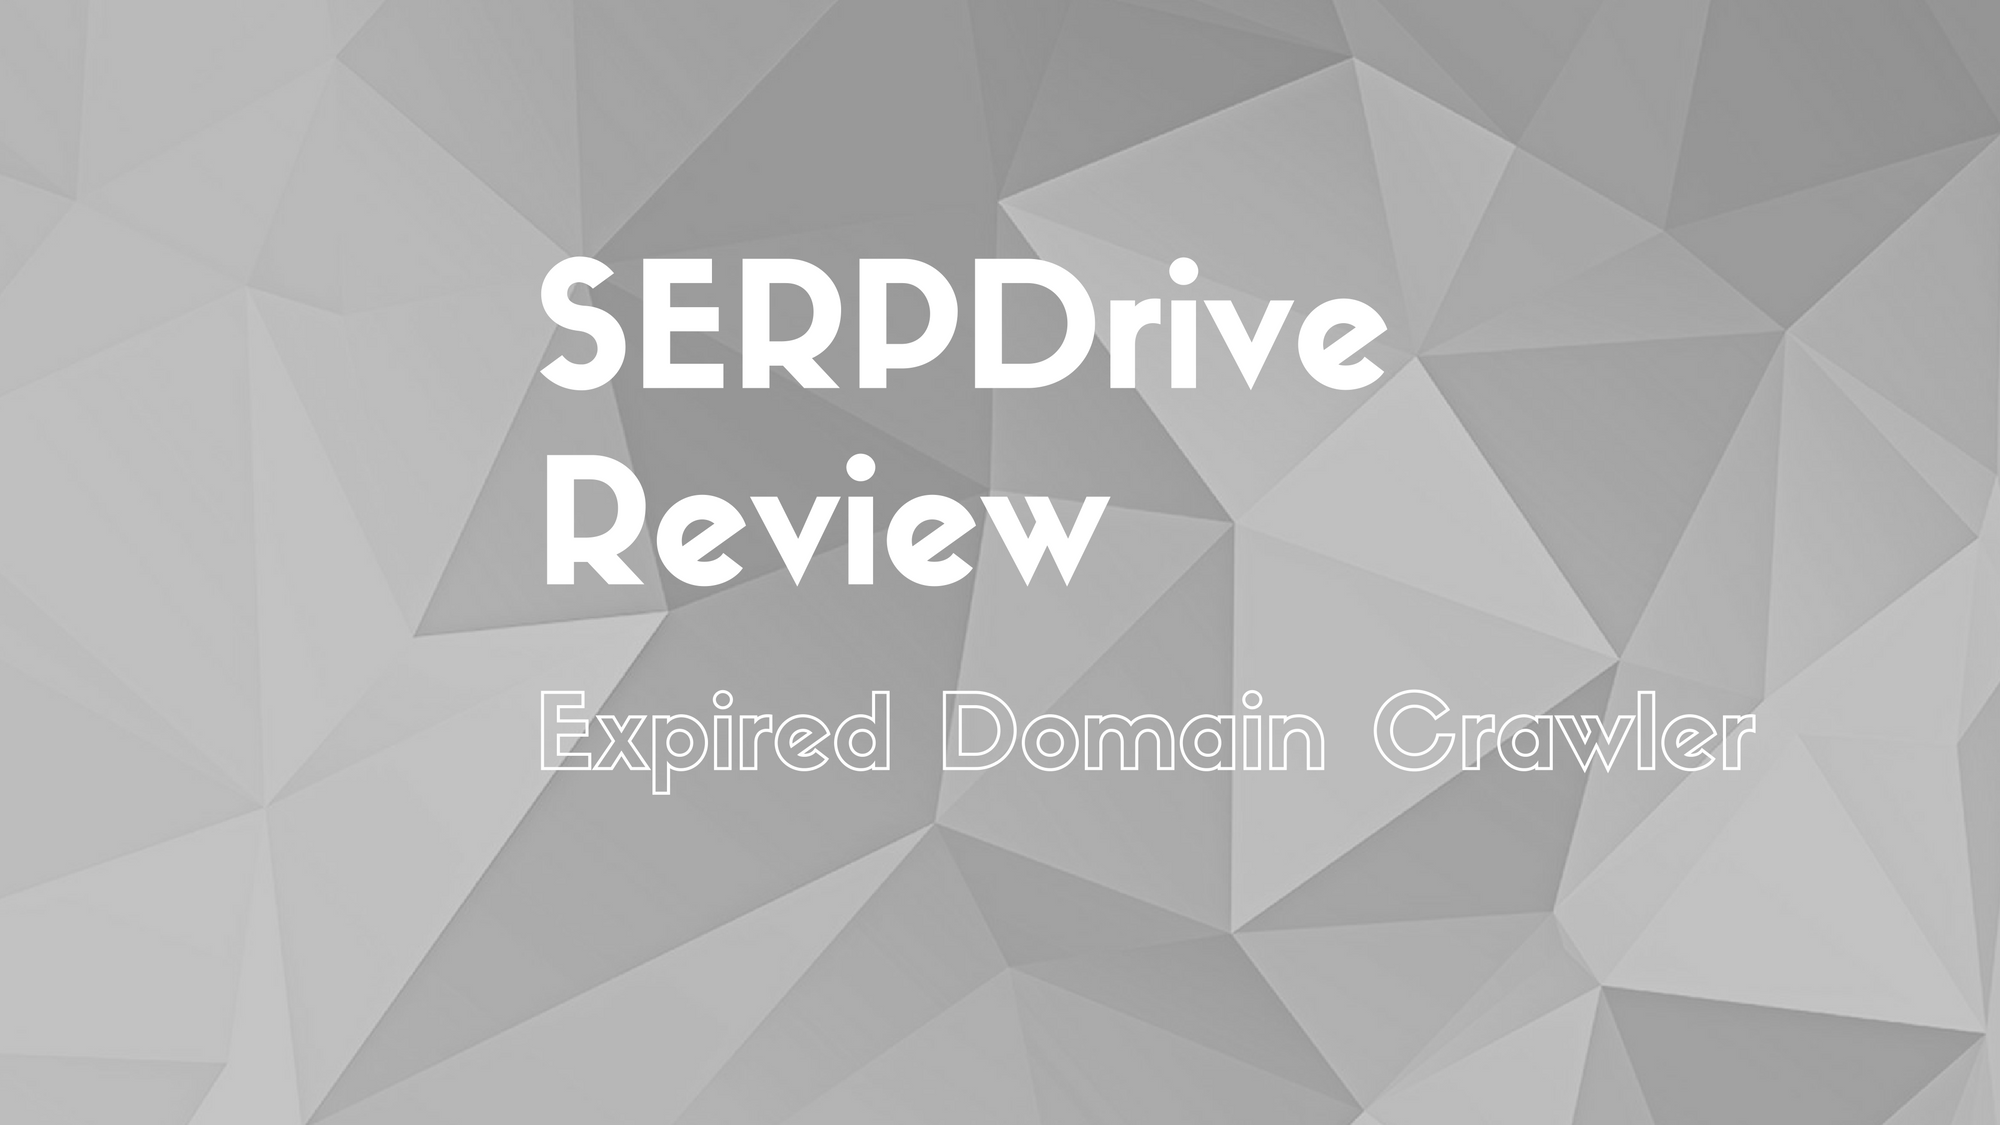 SERPDrive is an expired domain crawler, in this post I review it for you.